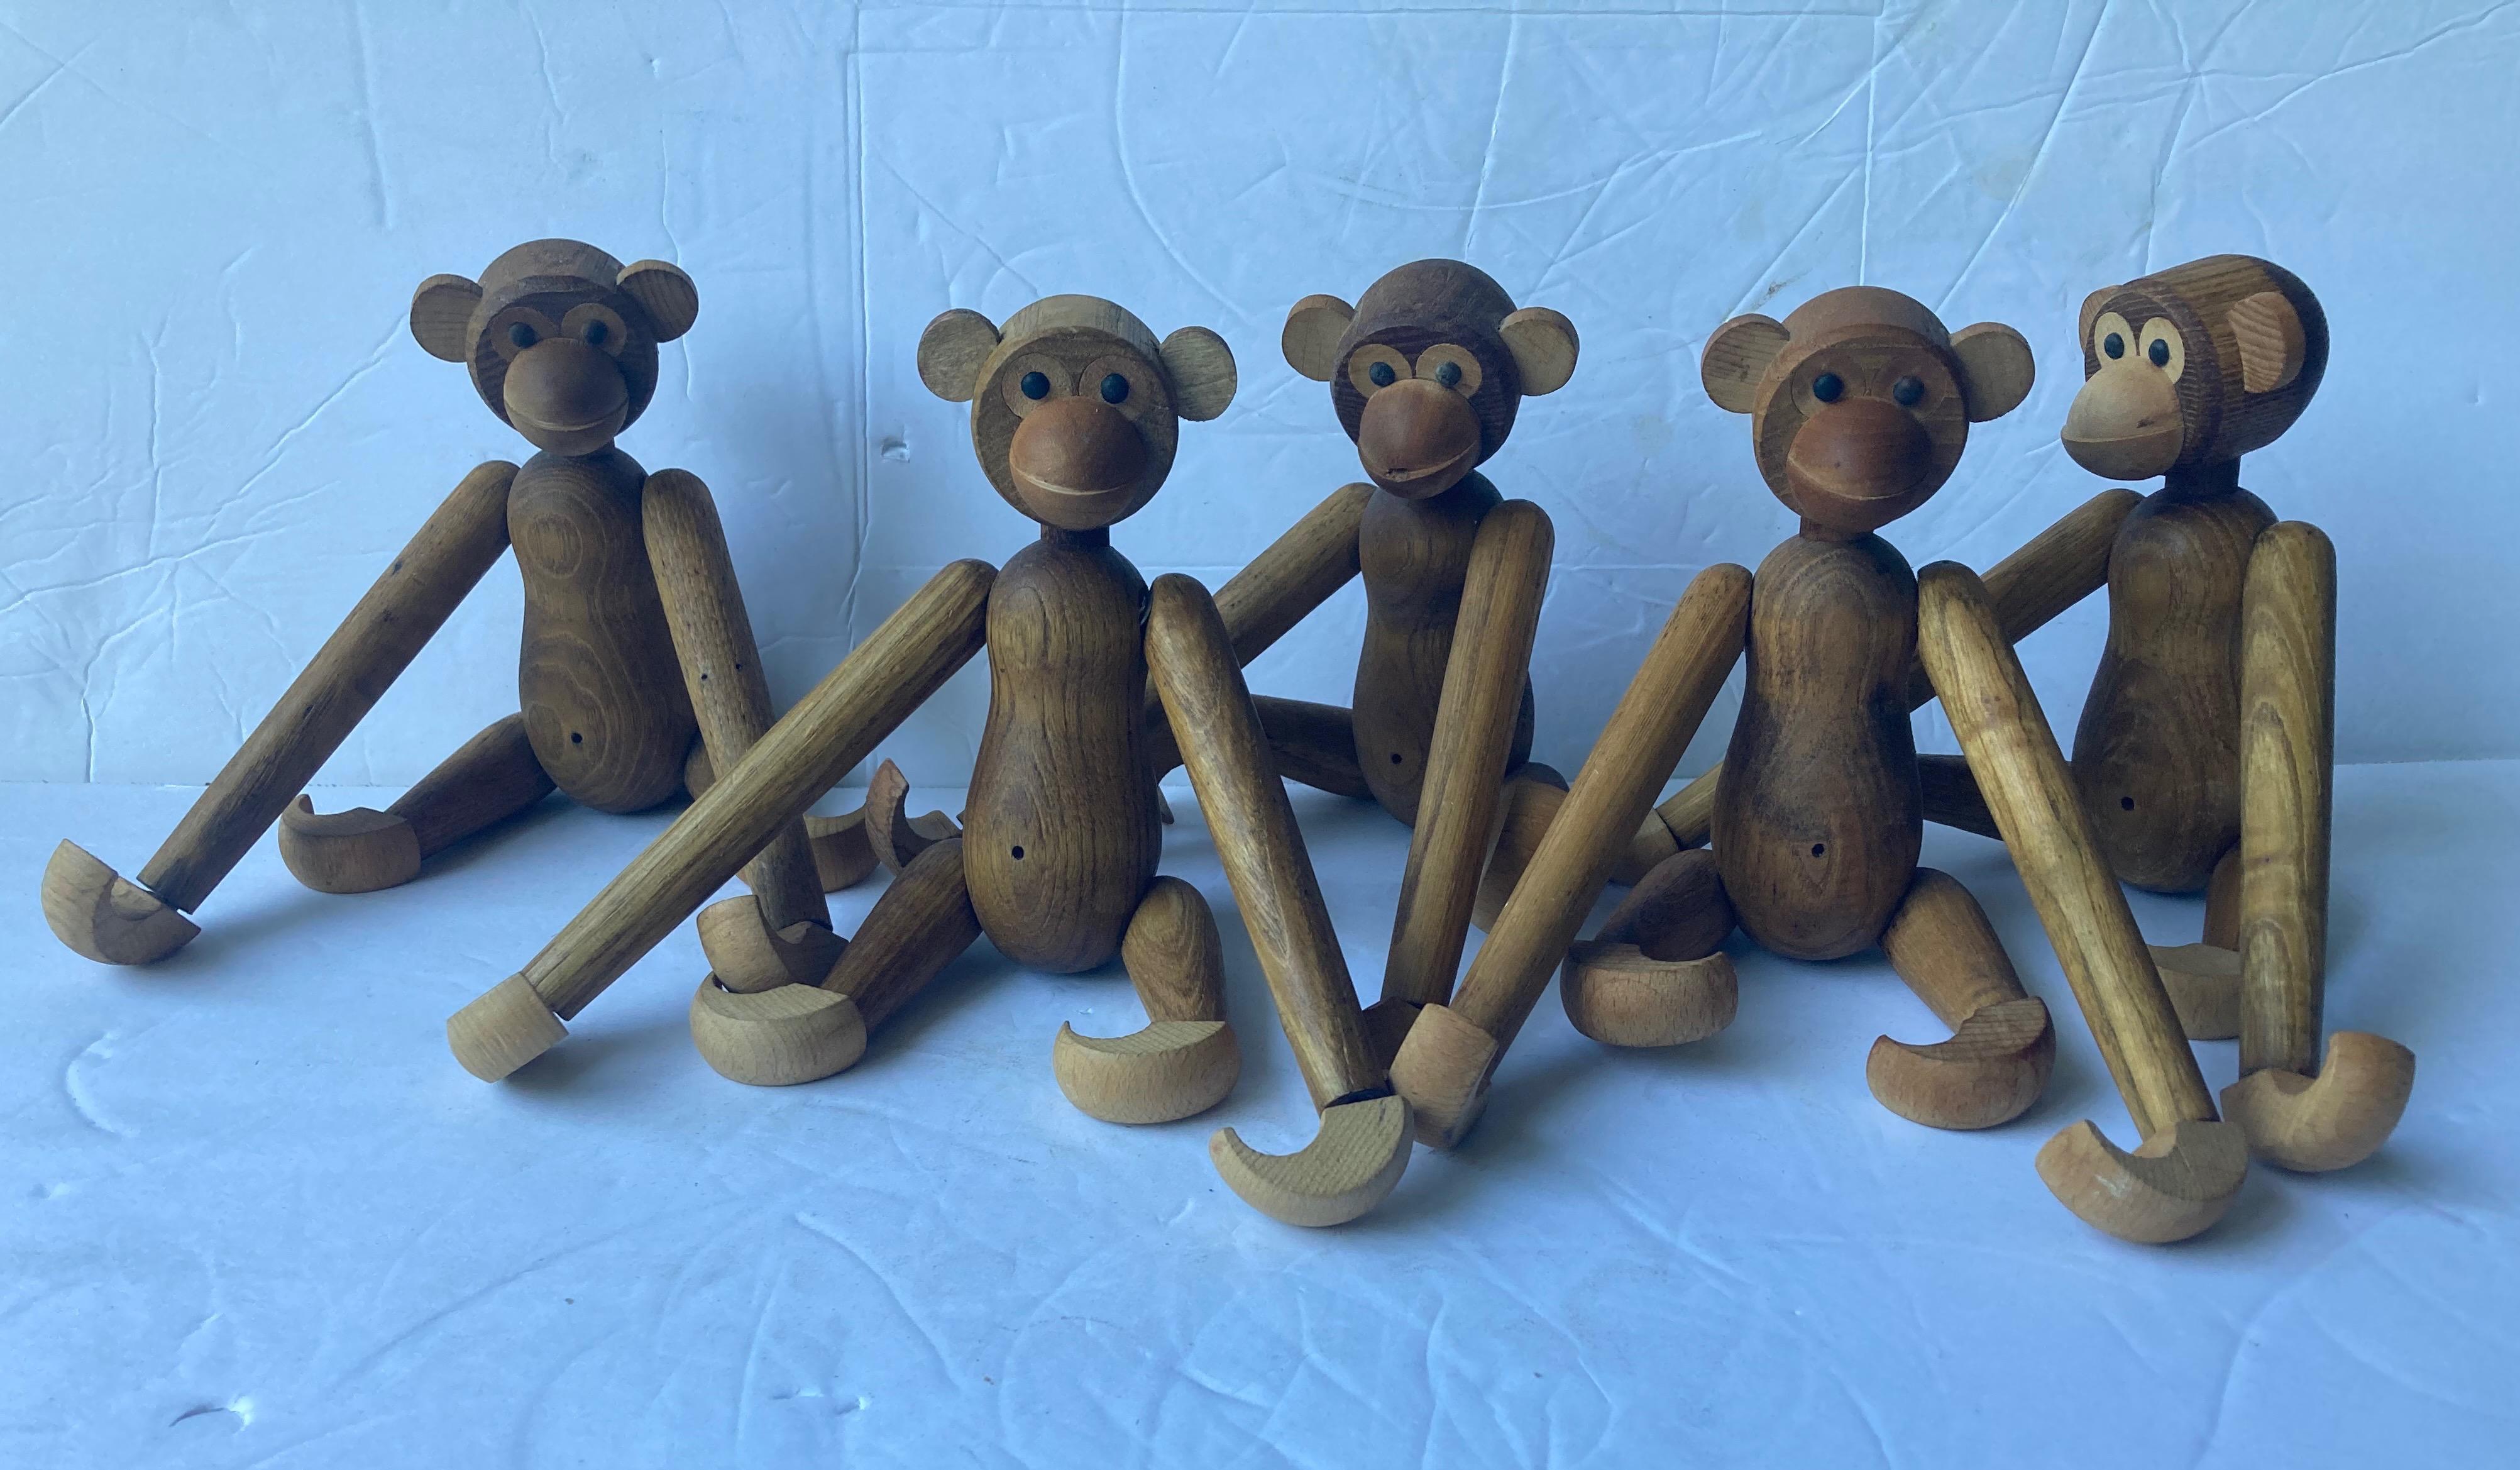 Hand-Crafted Collection of 5 Articulated Wooden Monkeys/Toys/Sculptures in Style of Bojesen For Sale